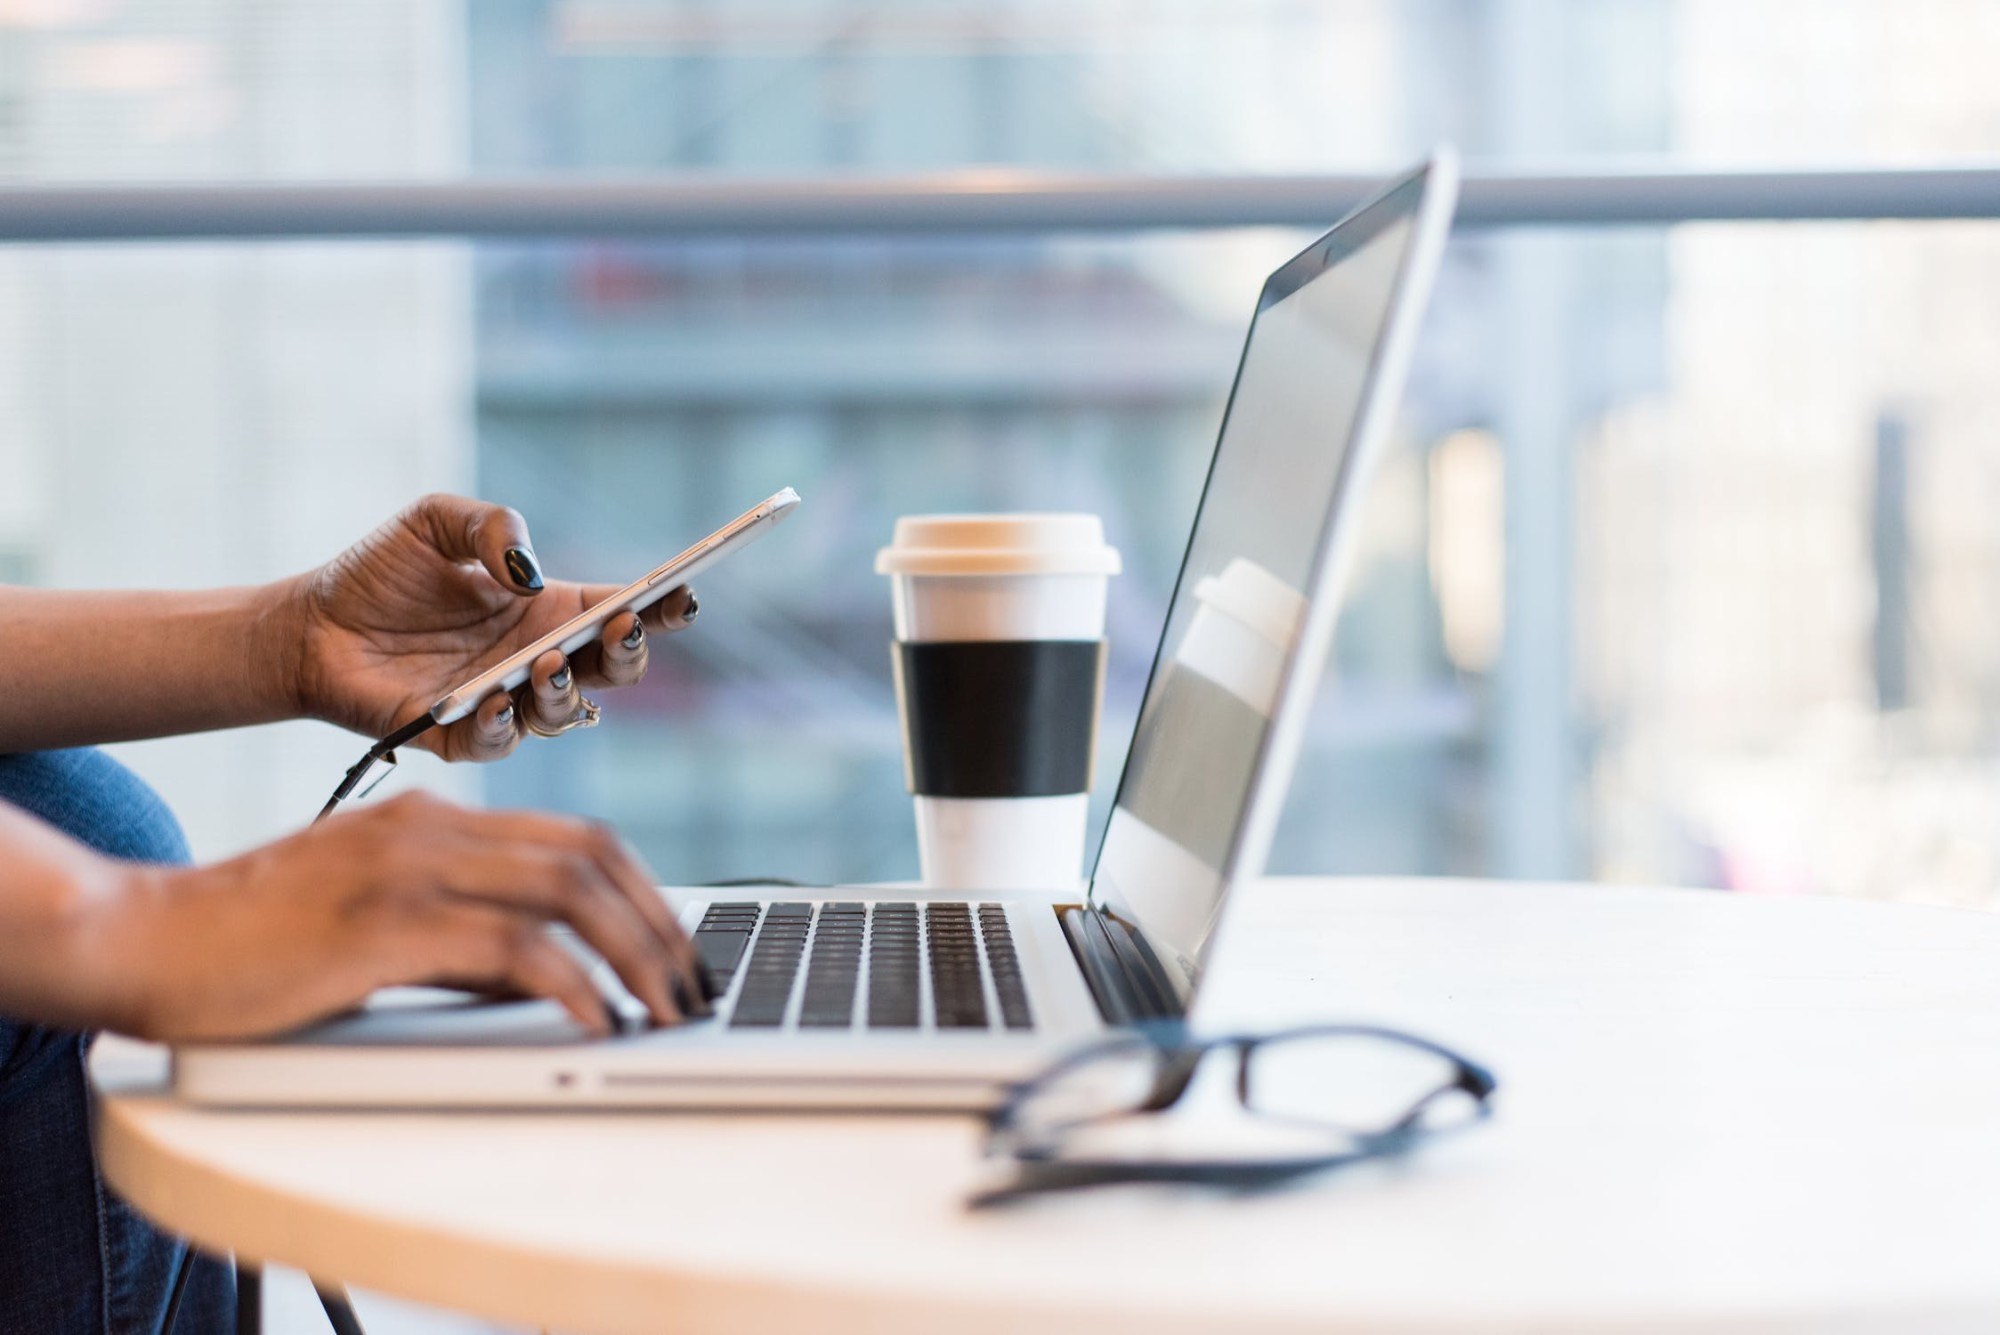 Business WiFi Essentials: How to Increase Internet Speed at the Office